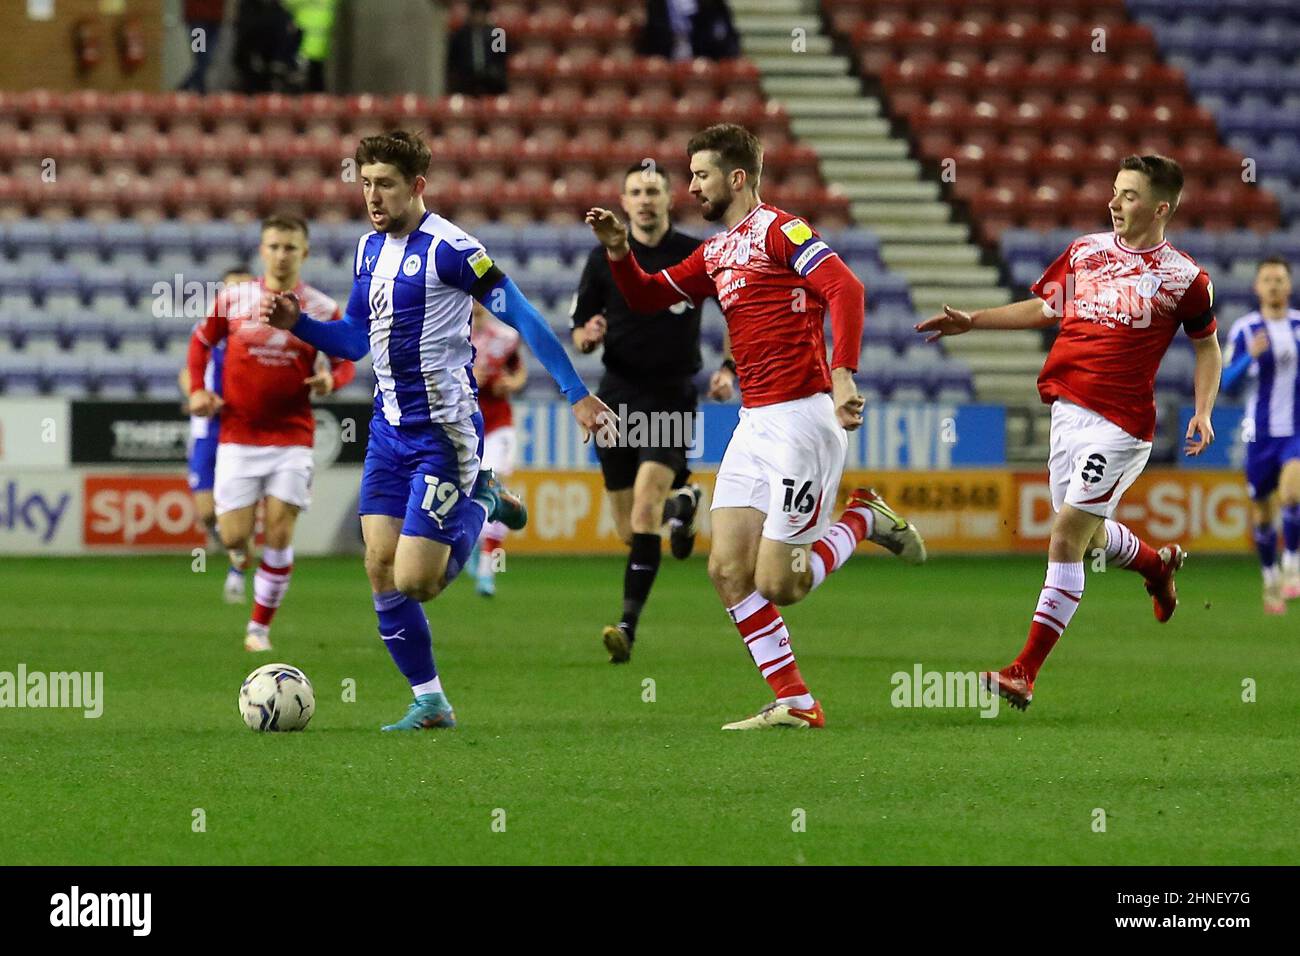 Wigan, UK. 15th Feb, 2022. Callum Lang of Wigan Athletic during the Sky Bet League One match between Wigan Athletic and Crewe Alexandra at DW Stadium on February 15th 2022 in Wigan, England. (Photo by Tony Taylor/phcimages.com) Credit: PHC Images/Alamy Live News Stock Photo